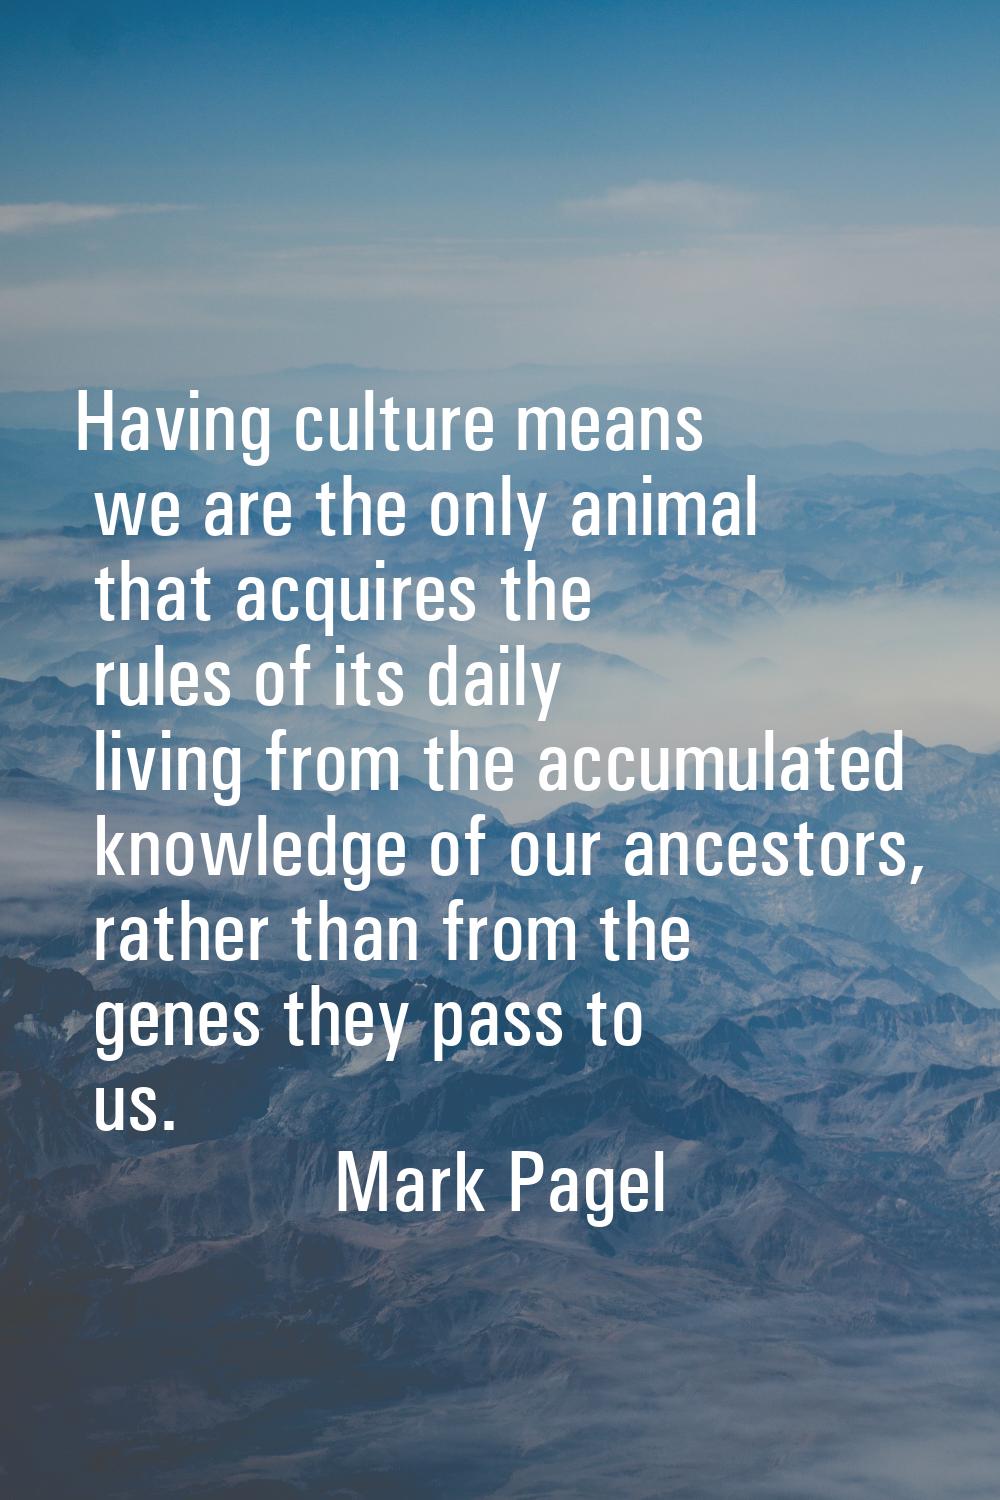 Having culture means we are the only animal that acquires the rules of its daily living from the ac